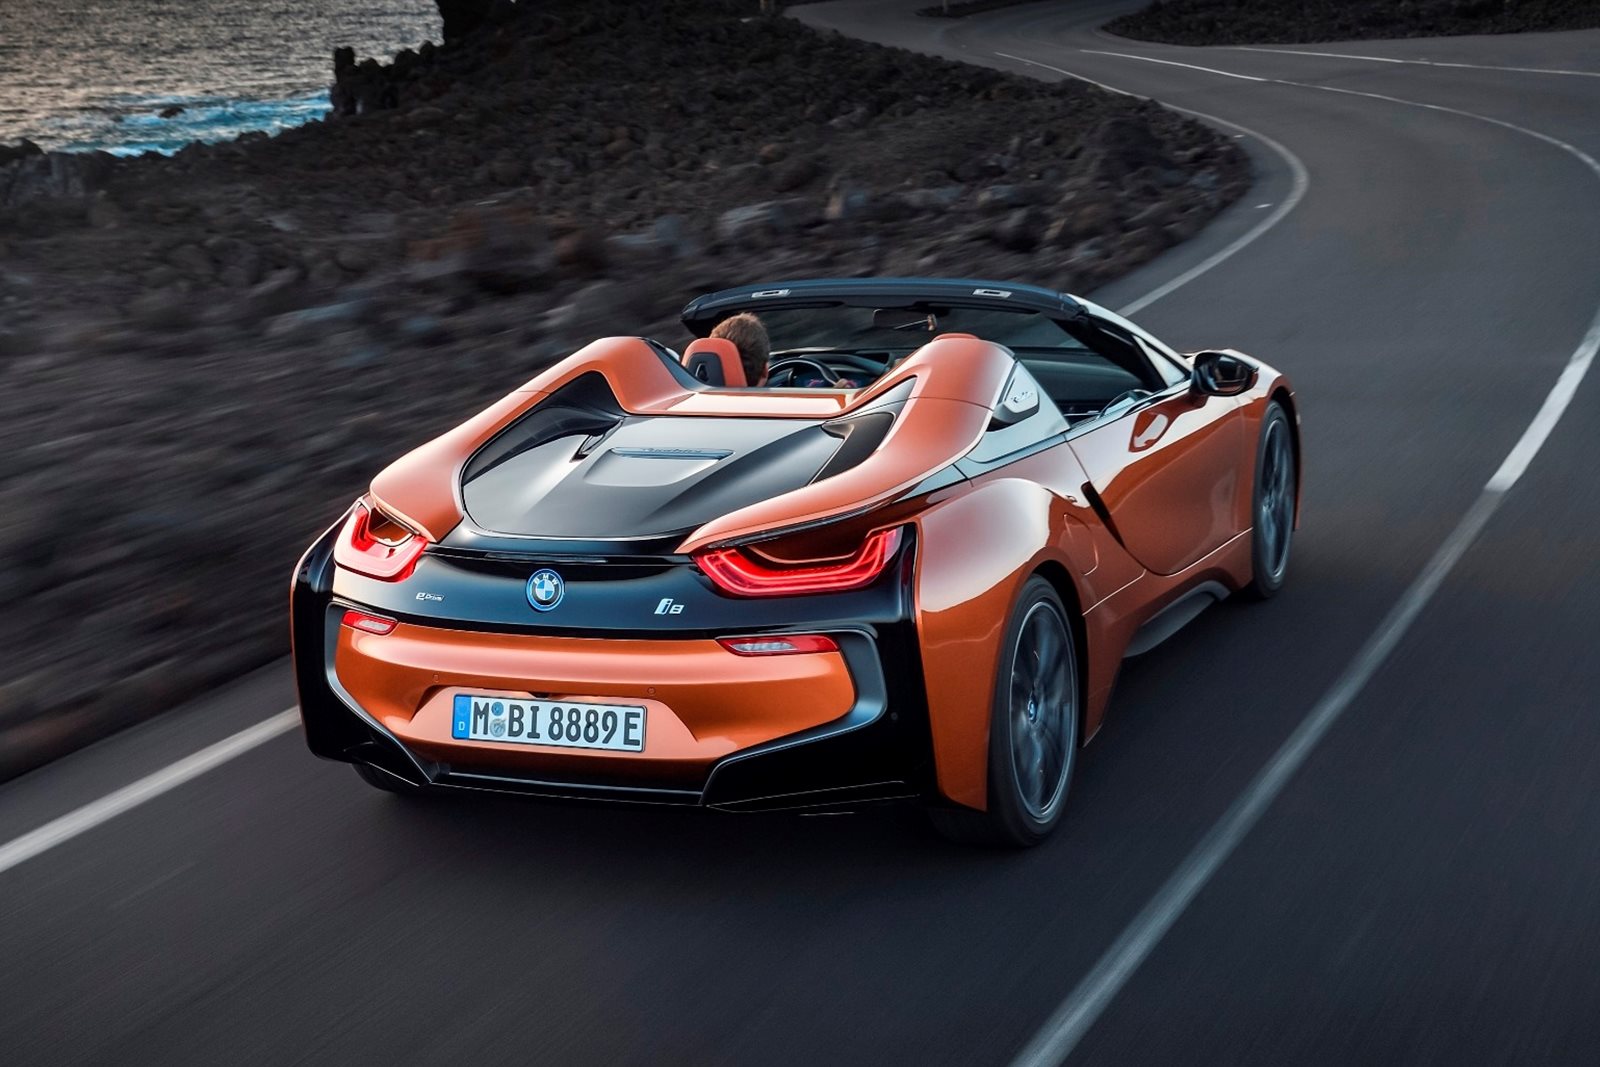 2019 BMW i8 Roadster First Drive: Cloth Roof, No Back Seat, More Money, Review